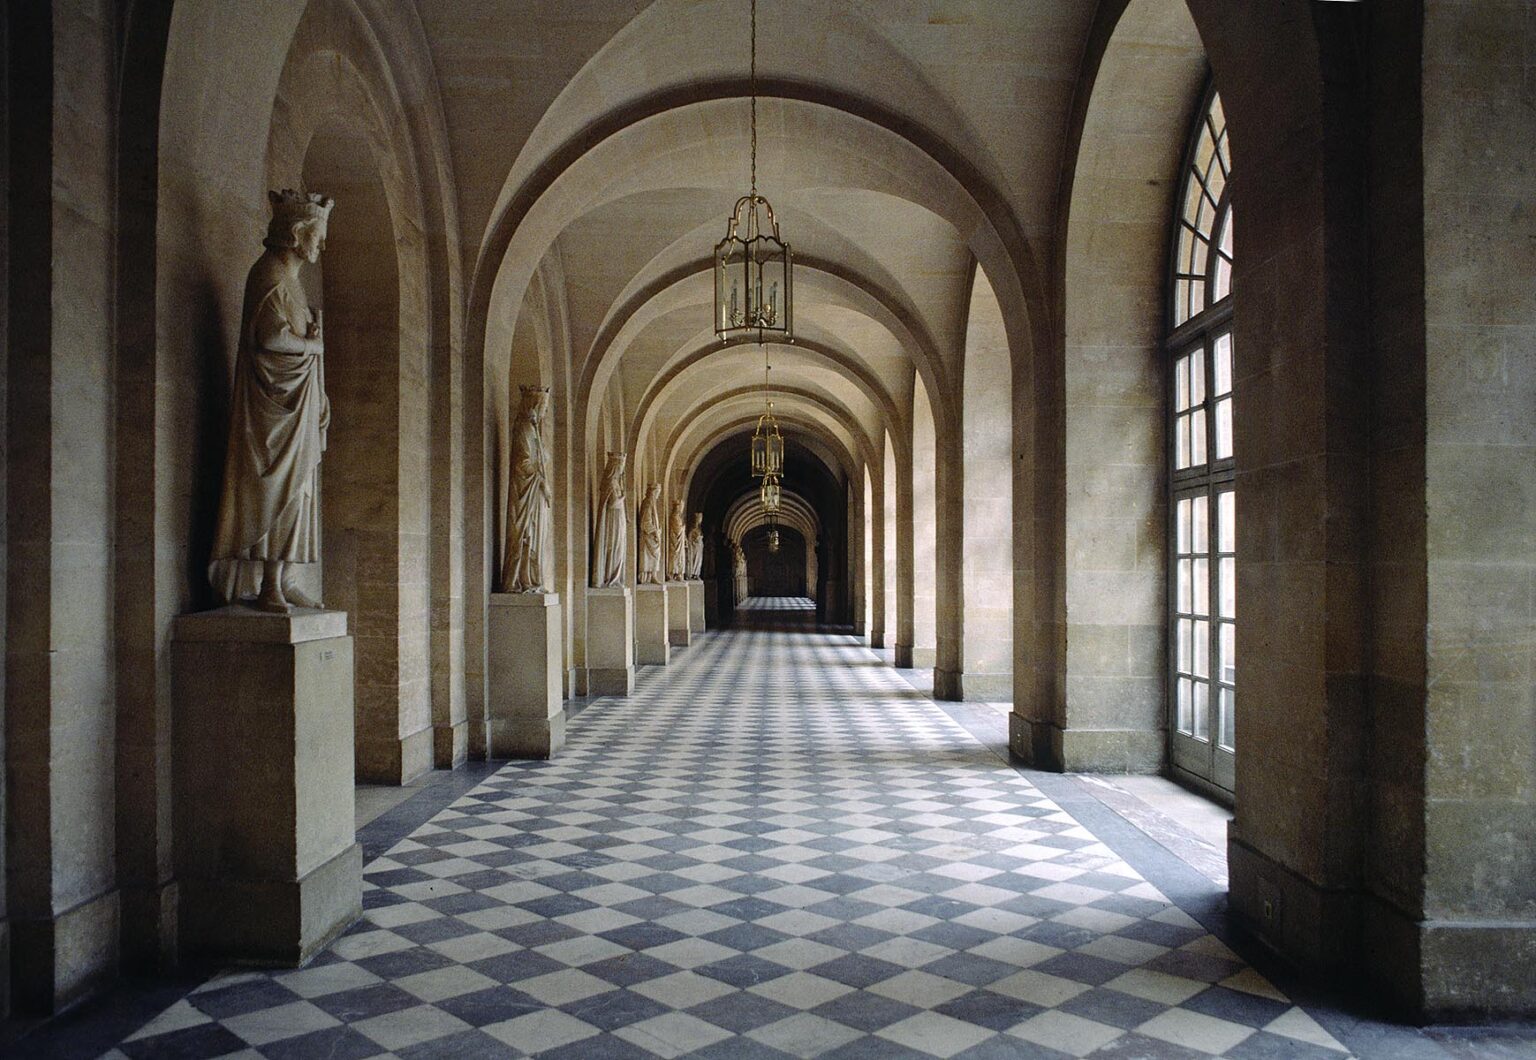 STATUES of FRENCH MONARCHS and MARBLE HALLWAY in the PALACE OF VERSAILLES, pleasure home of LOUIS XIV - VERSAILLES, FRANCE